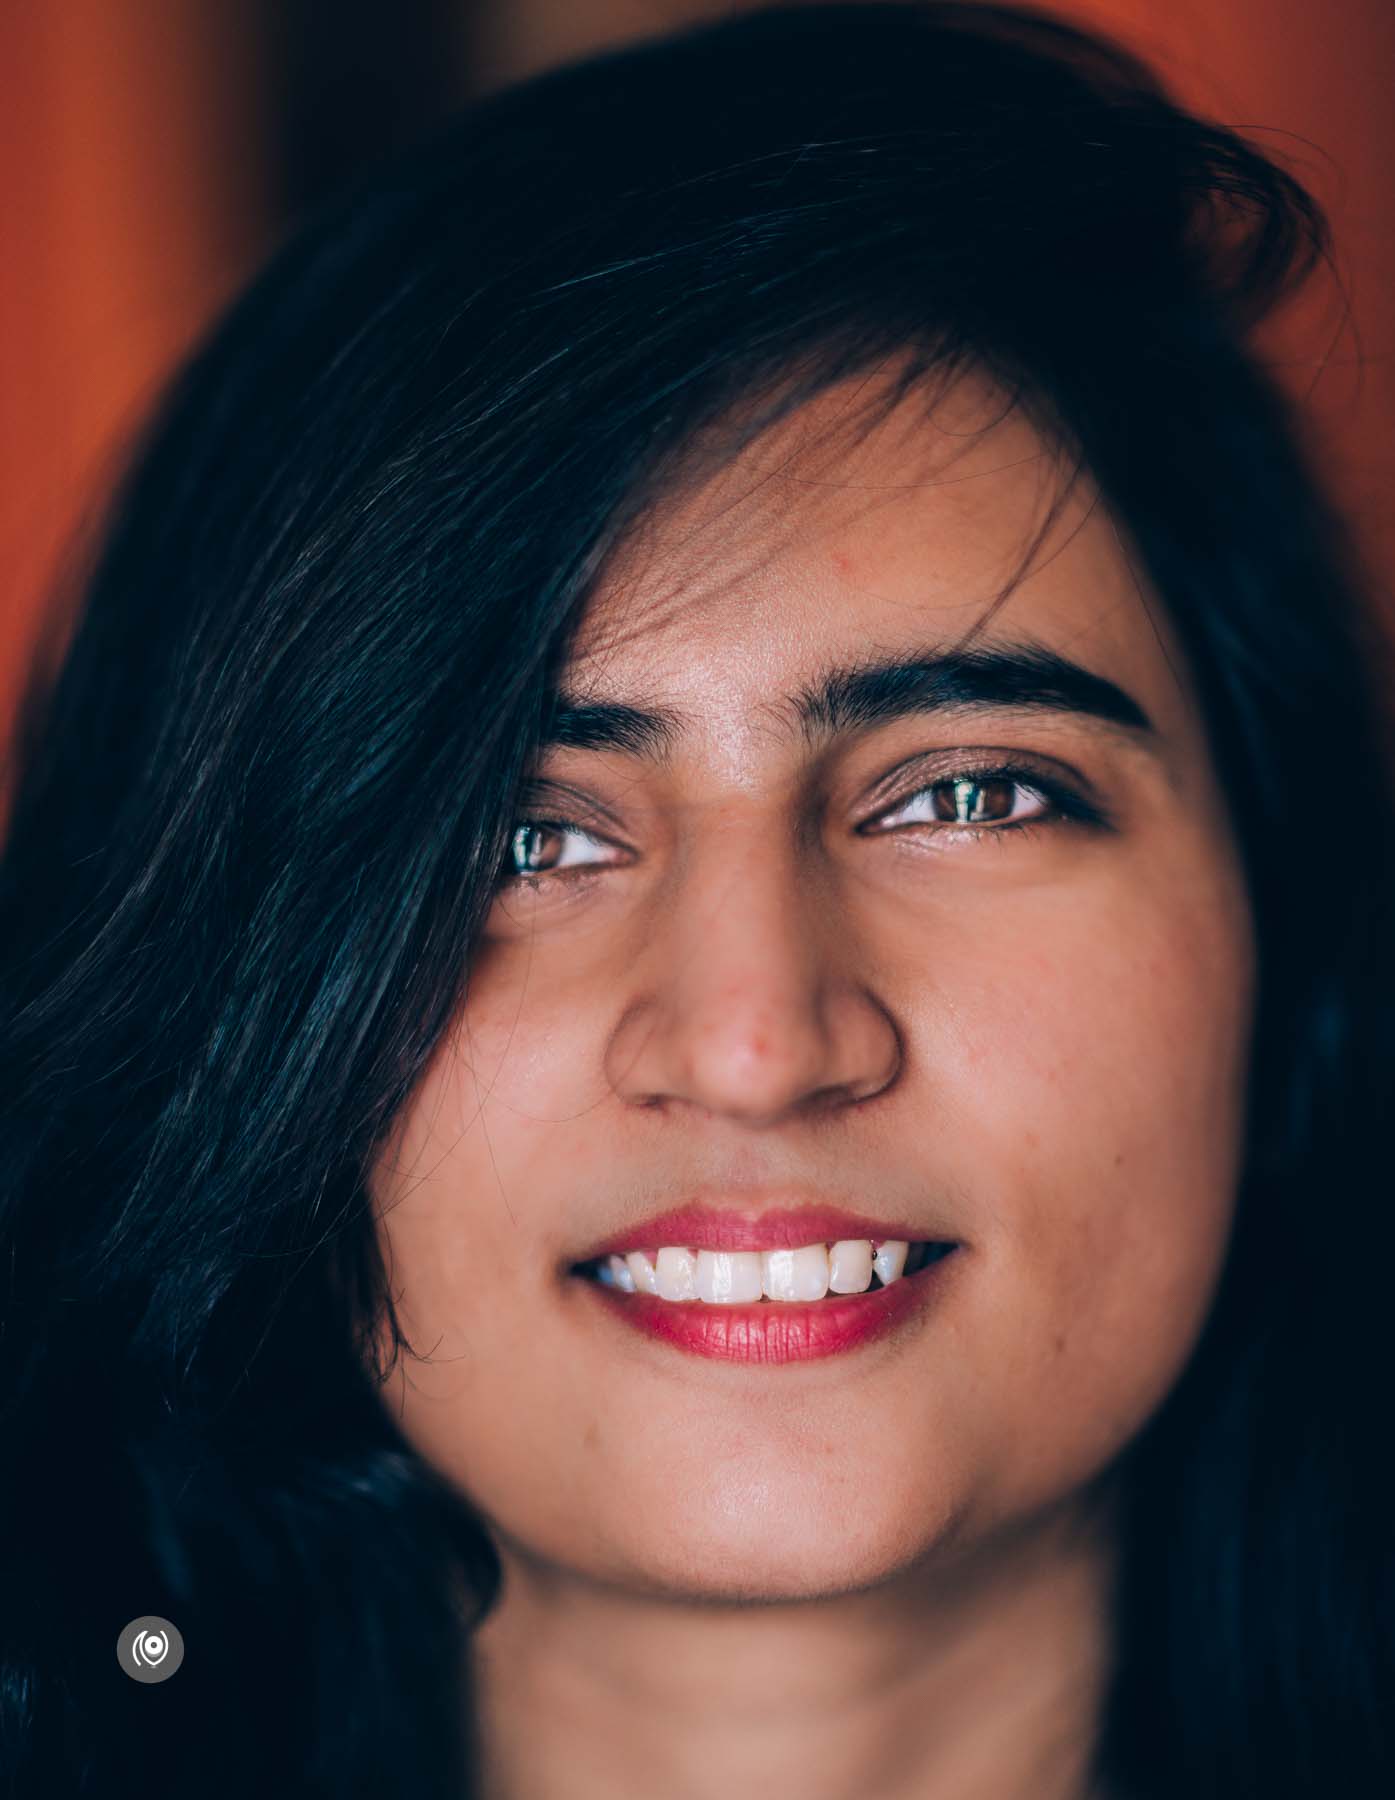 Naina Redhu, Photographer, Lifestyle Photographer, Portrait Photographer, Lifestyle Blogger, Photo Blogger, Photographer Blogger, Neha Sharma, Neha Doodles, Doodler, Illustrator, Graphic Designer, Minty, Home, A Day With, #EyesForPeople